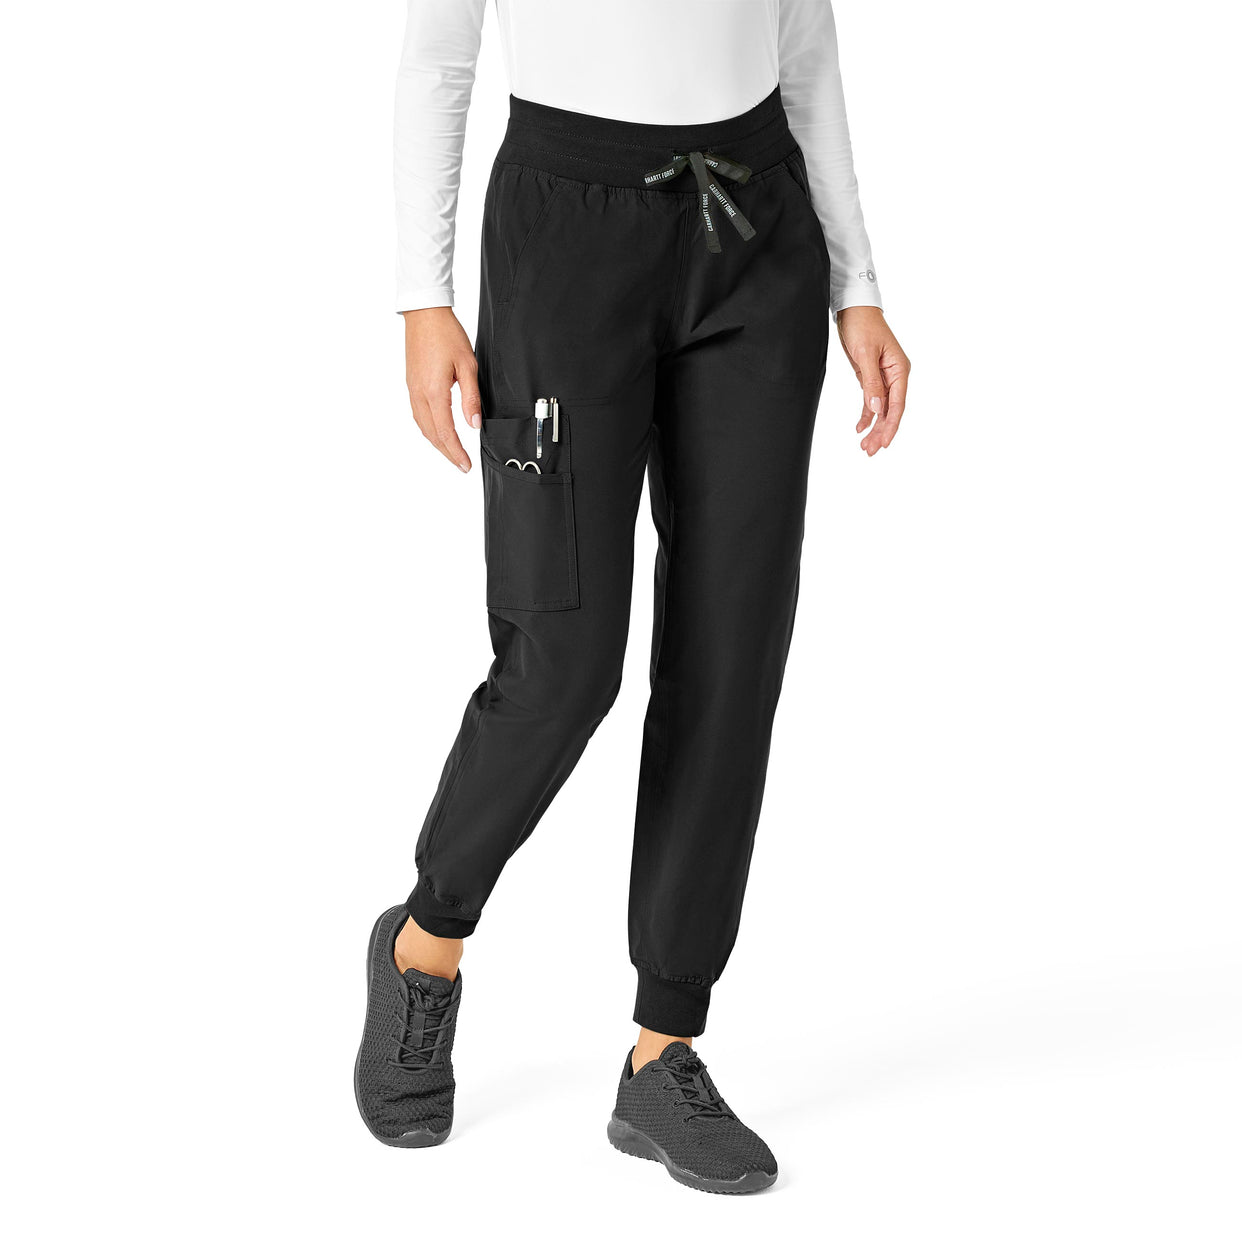 Force Essentials Women's Jogger Scrub Pant Black side view